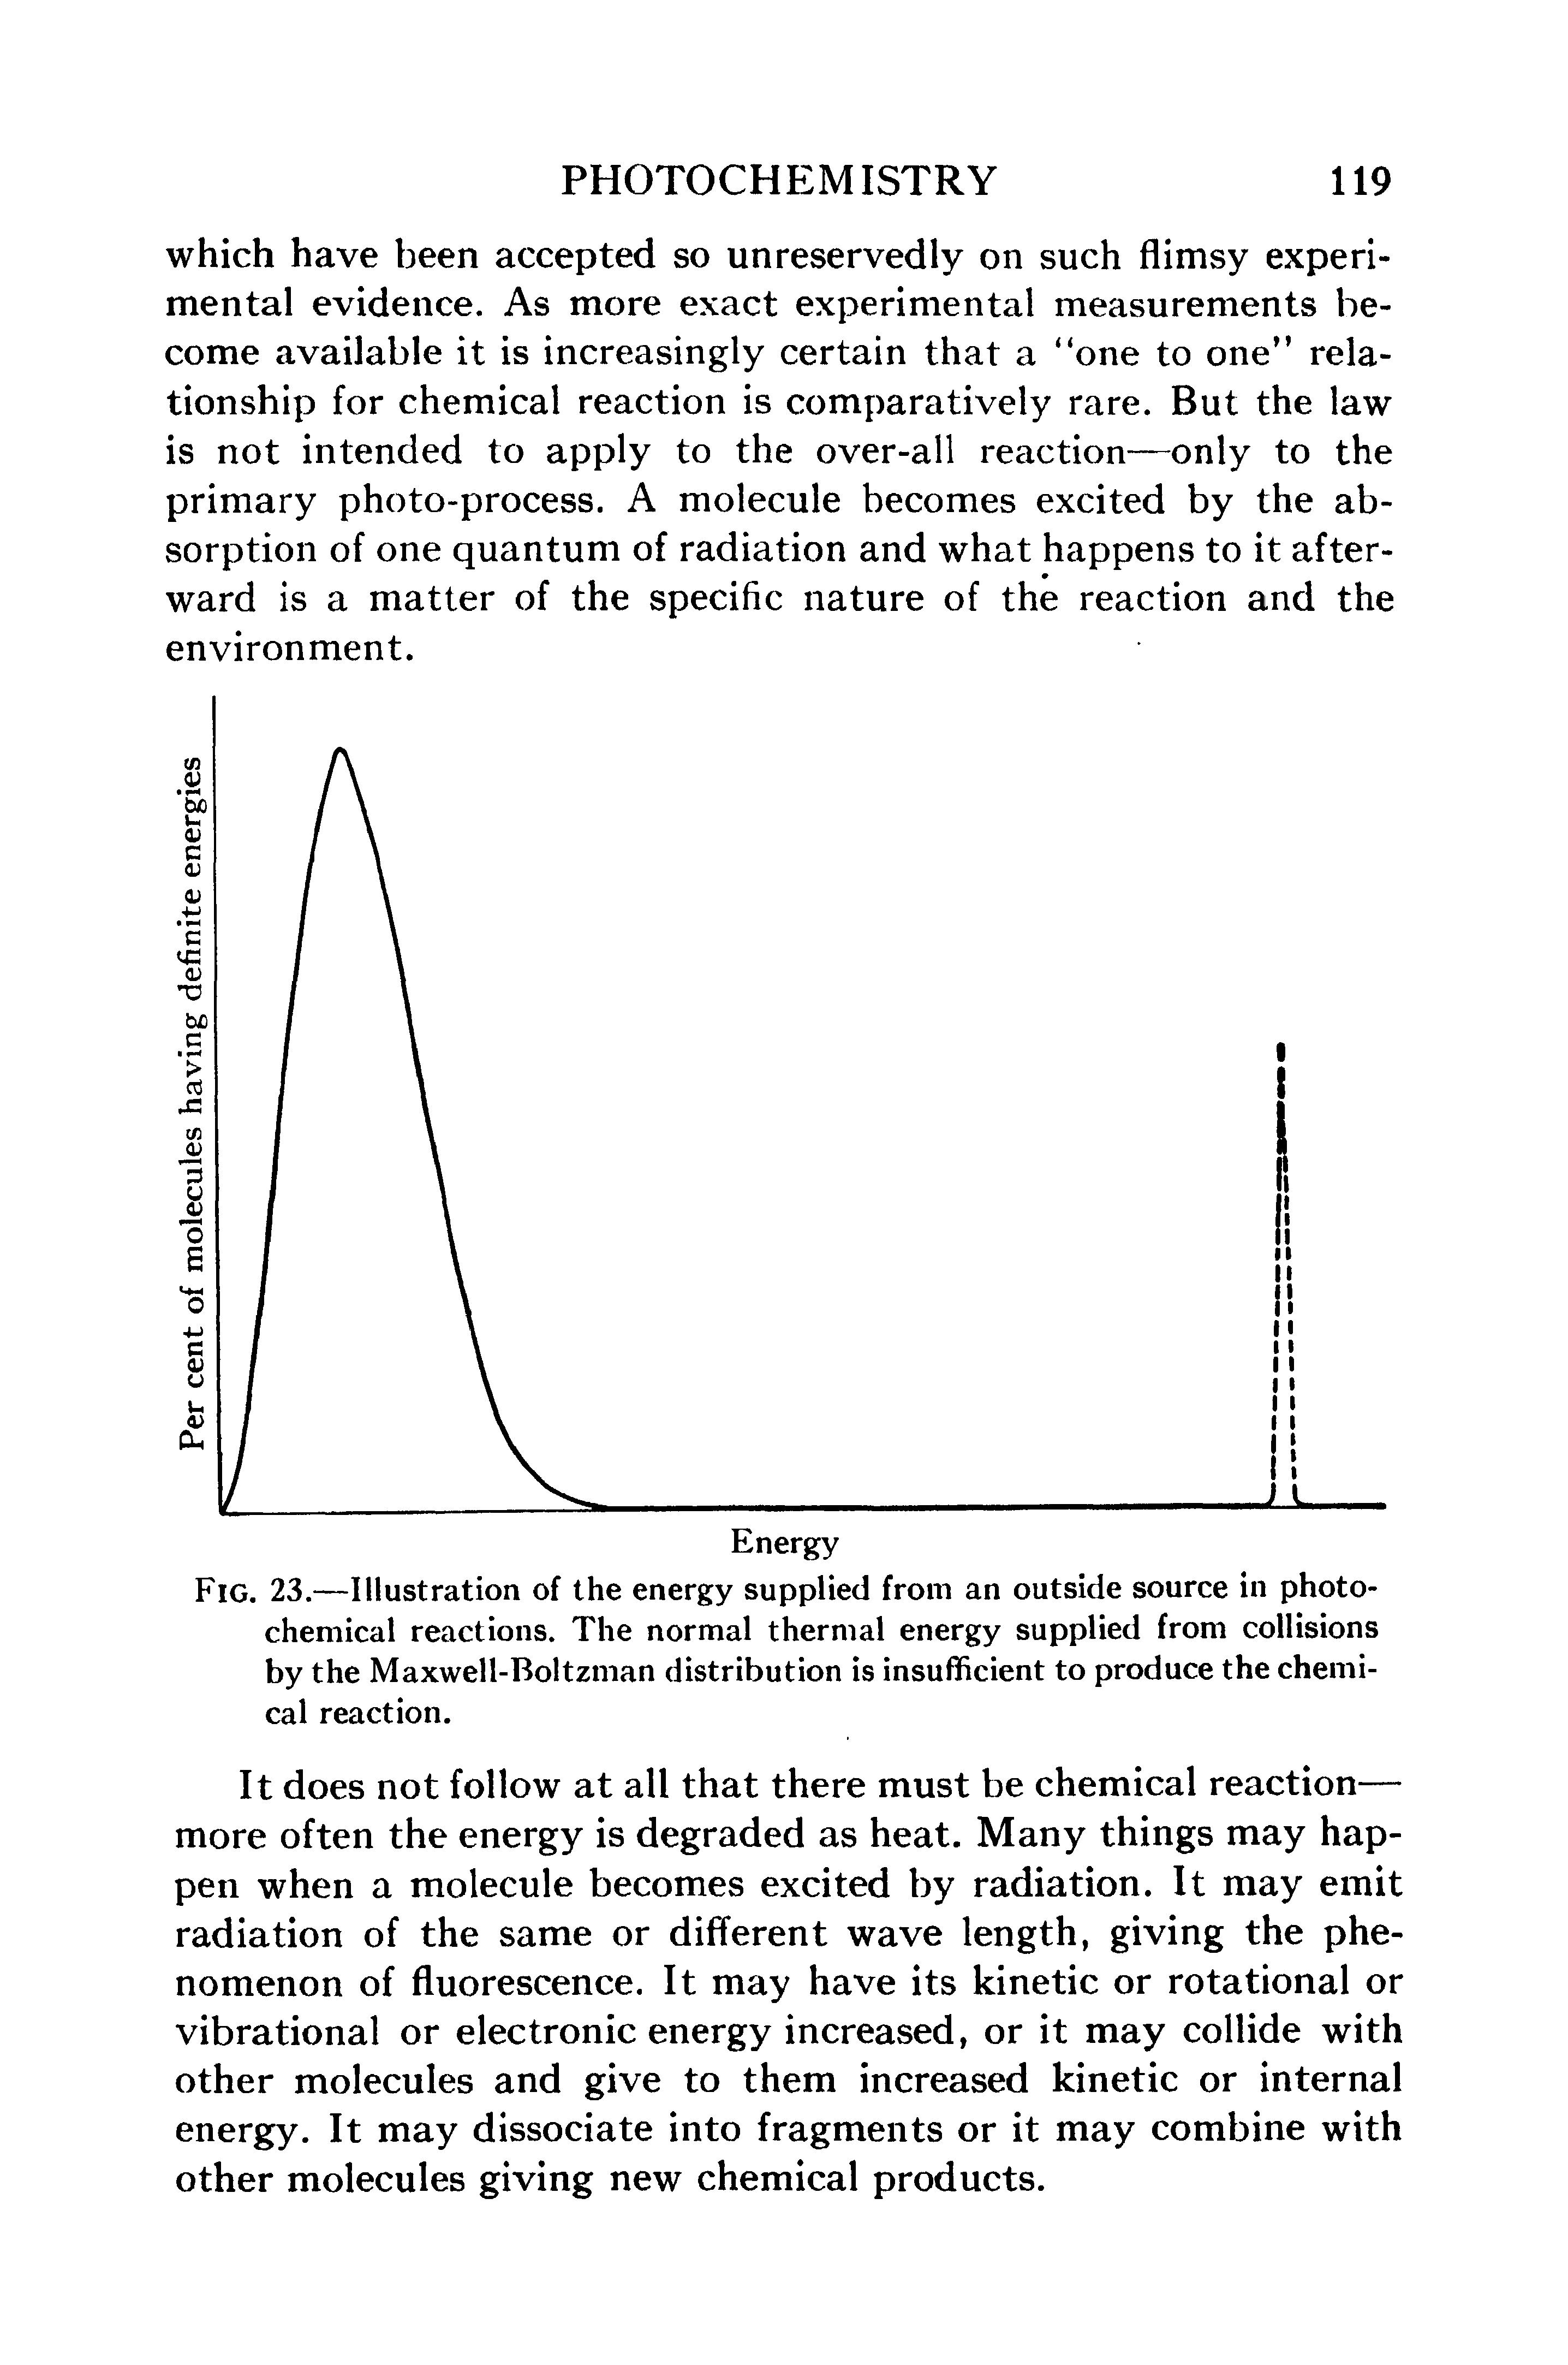 Fig. 23.—Illustration of the energy supplied from an outside source in photochemical reactions. The normal thermal energy supplied from collisions by the Maxwell-Boltzman distribution is insufficient to produce the chemical reaction.